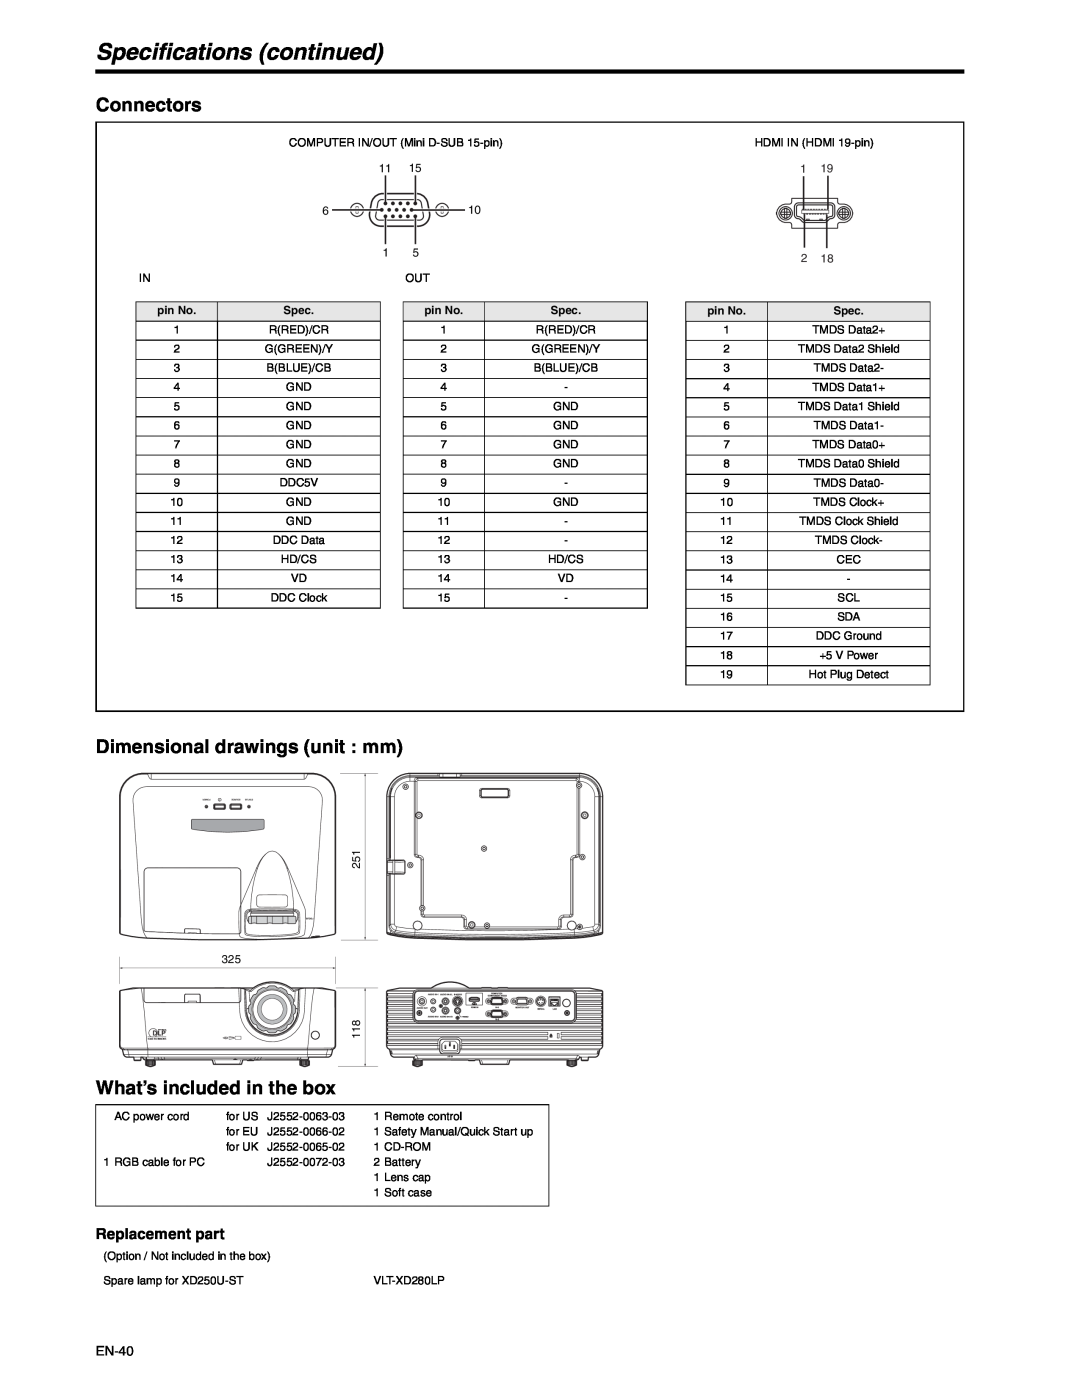 Mitsubishi Electronics XD250U-ST Specifications continued, Connectors, Dimensional drawings unit mm, Replacement part 